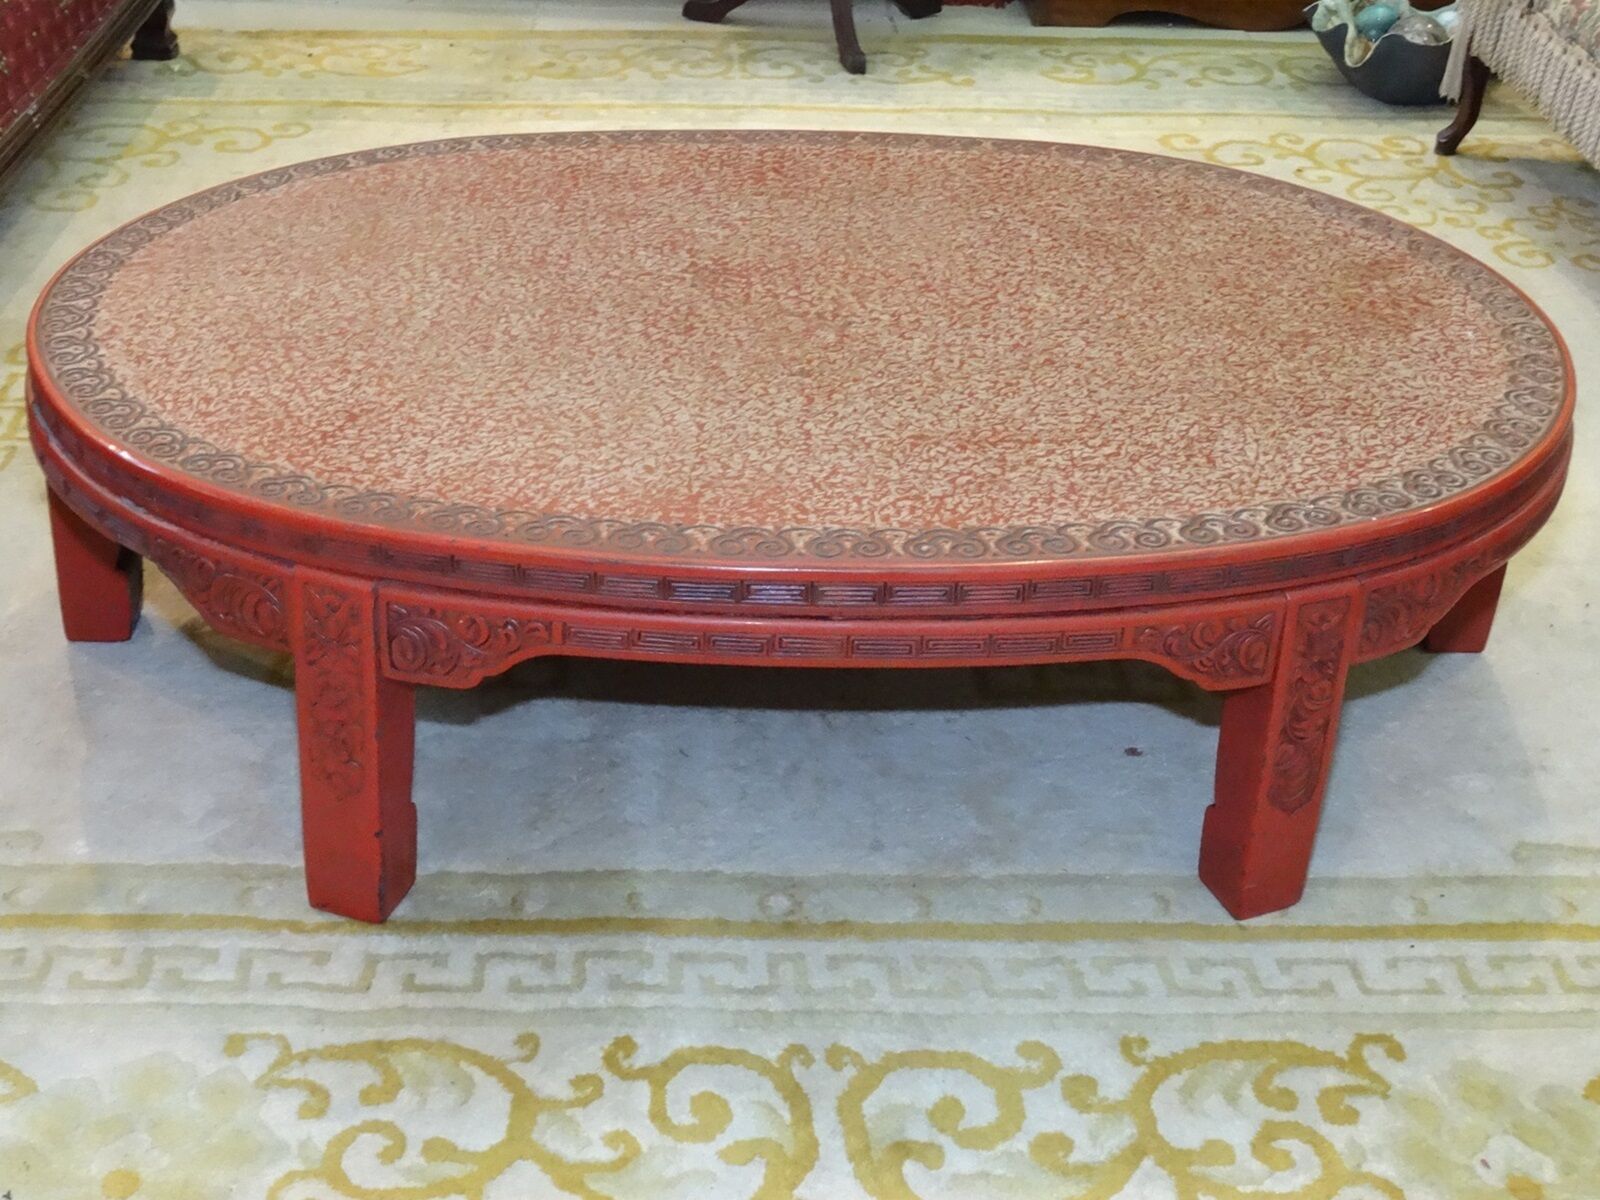 ANTIQUE LATE 19 c. CHINESE LACQUER INTRICATE CARVED CINNABAR COFFEE TABLE Без бренда - фотография #7